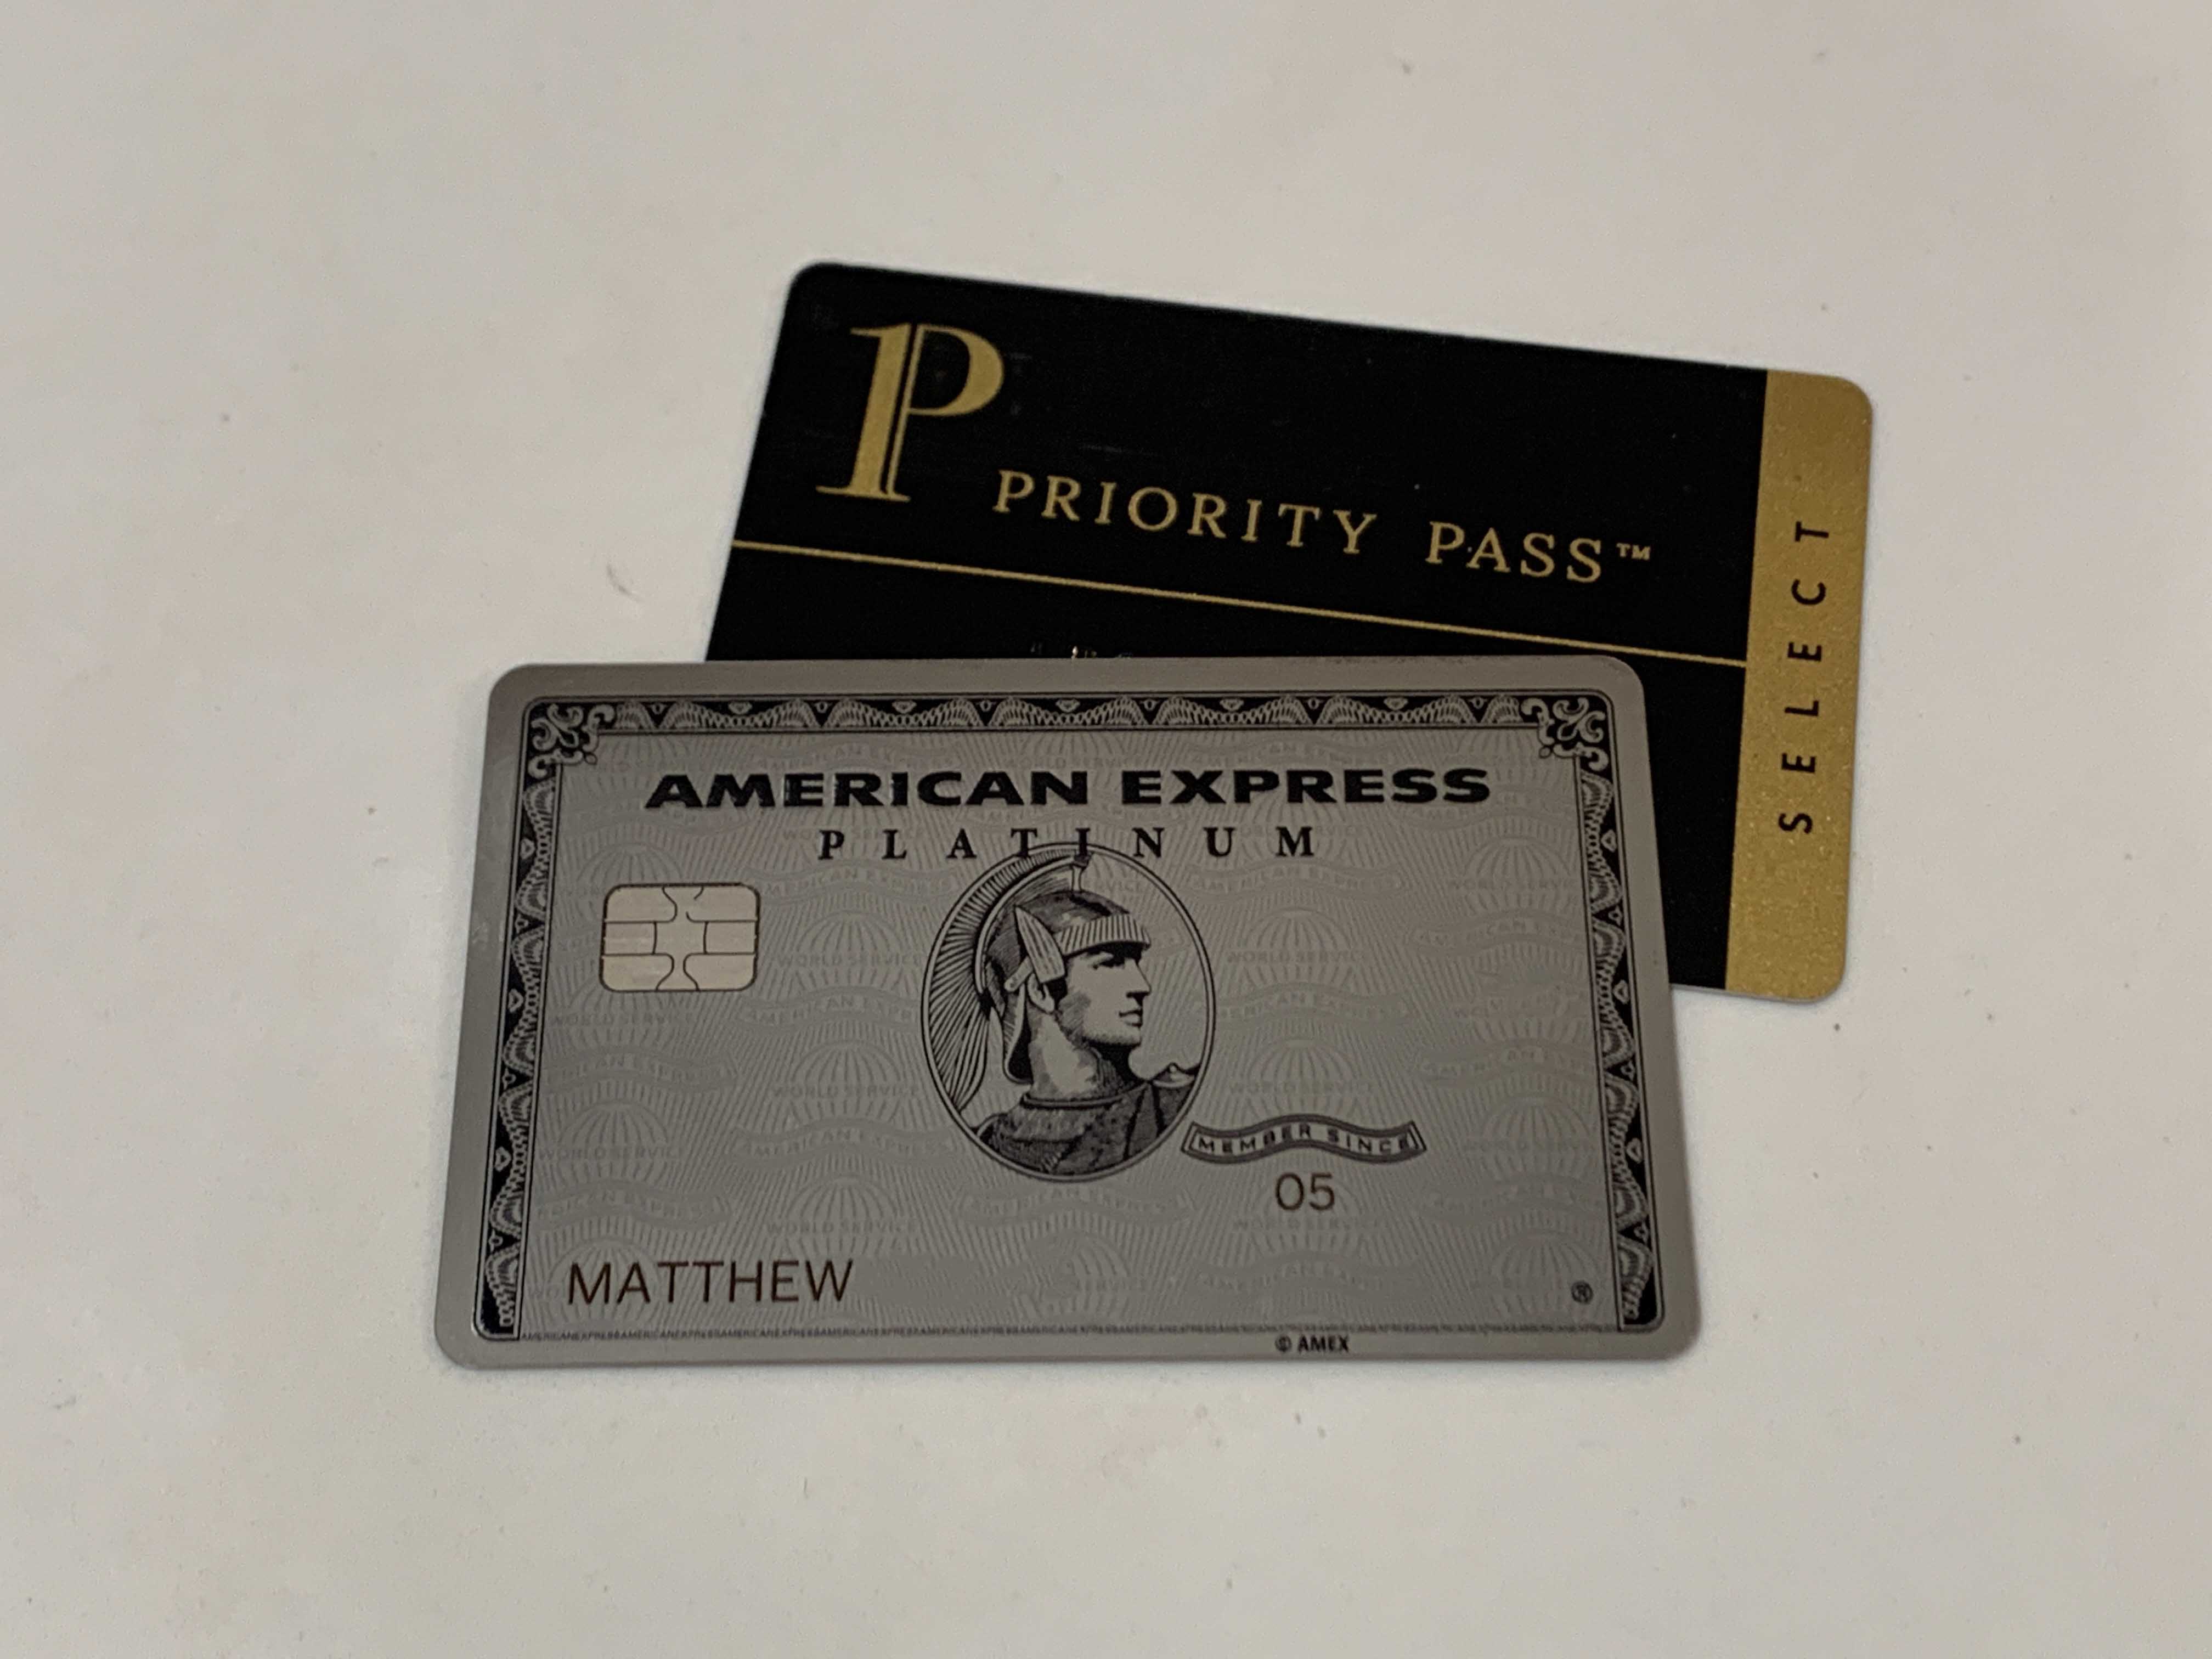 How AMEX Botched The Priority Pass Restaurant Issue - Live and Let's Fly